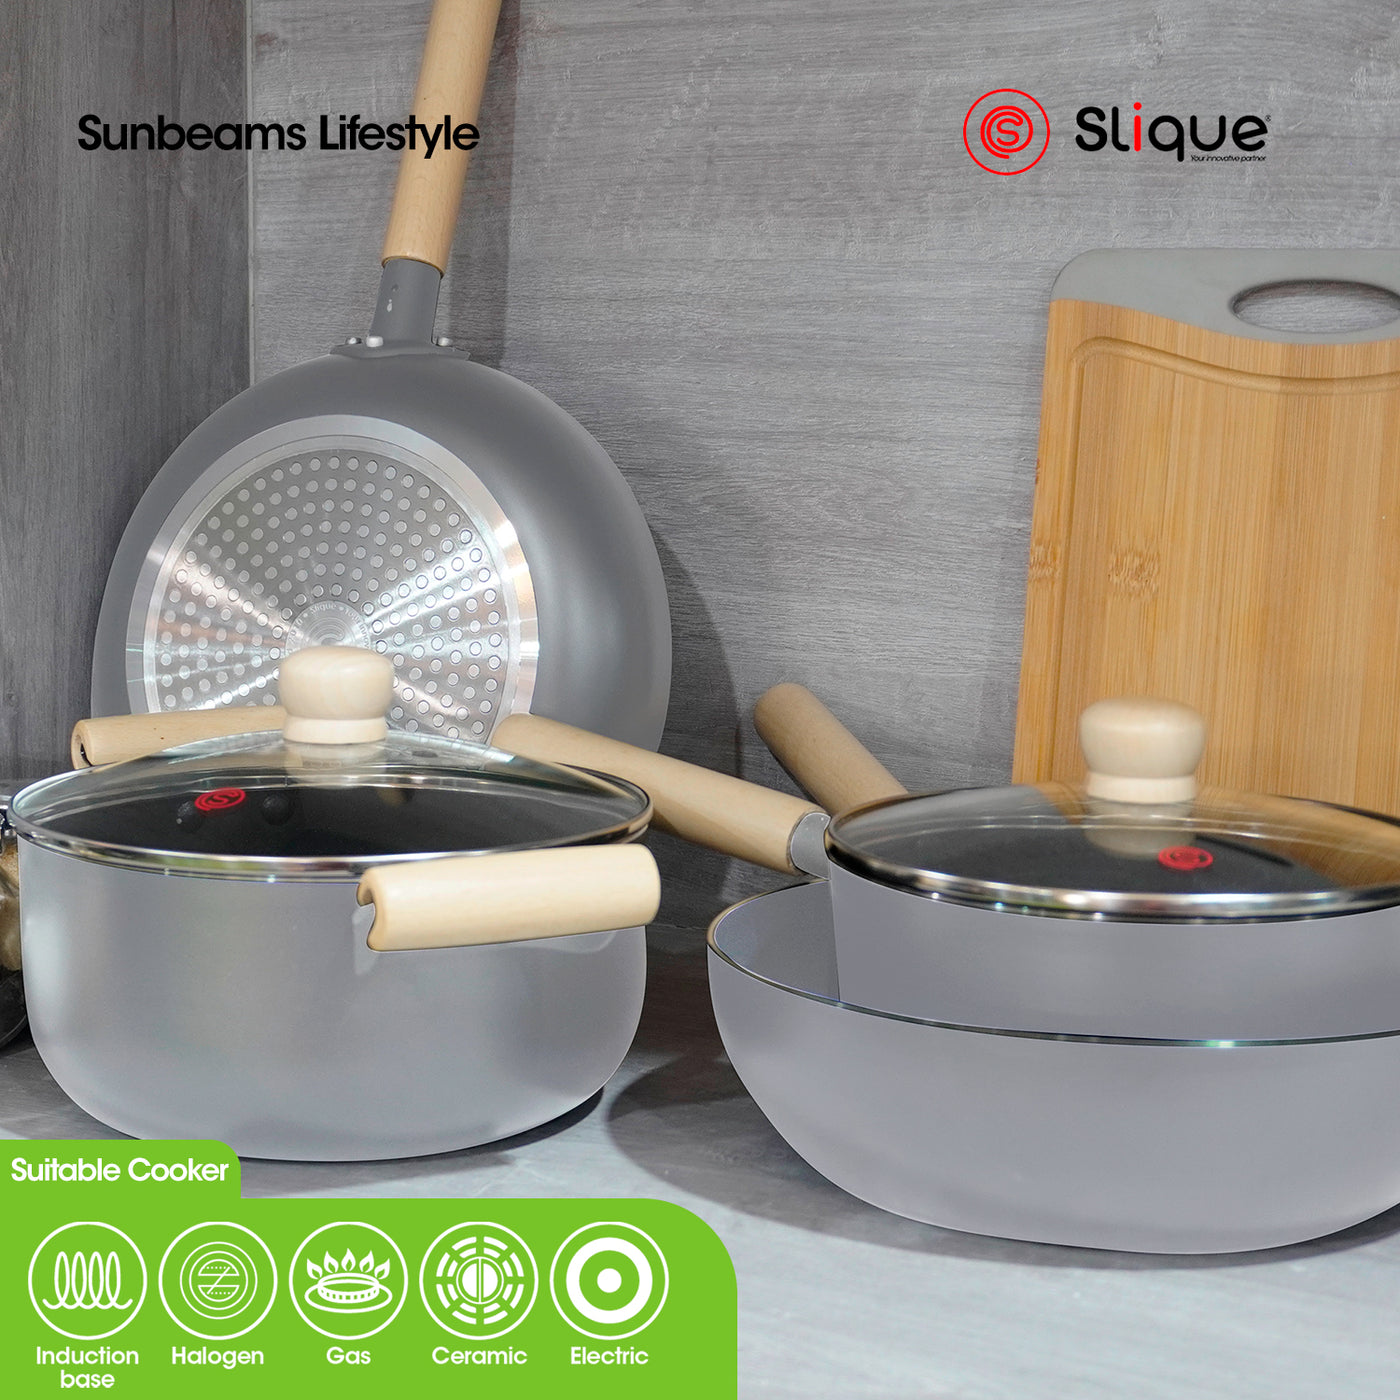 Slique Wok Pan Stainless Steel Multi Layer Non-Stick Ceramic Coating - Grey Induction Base, Wooden Bakelite Handle Healthy Cooking Essentials Amazing Gift Idea For Any Occasion!